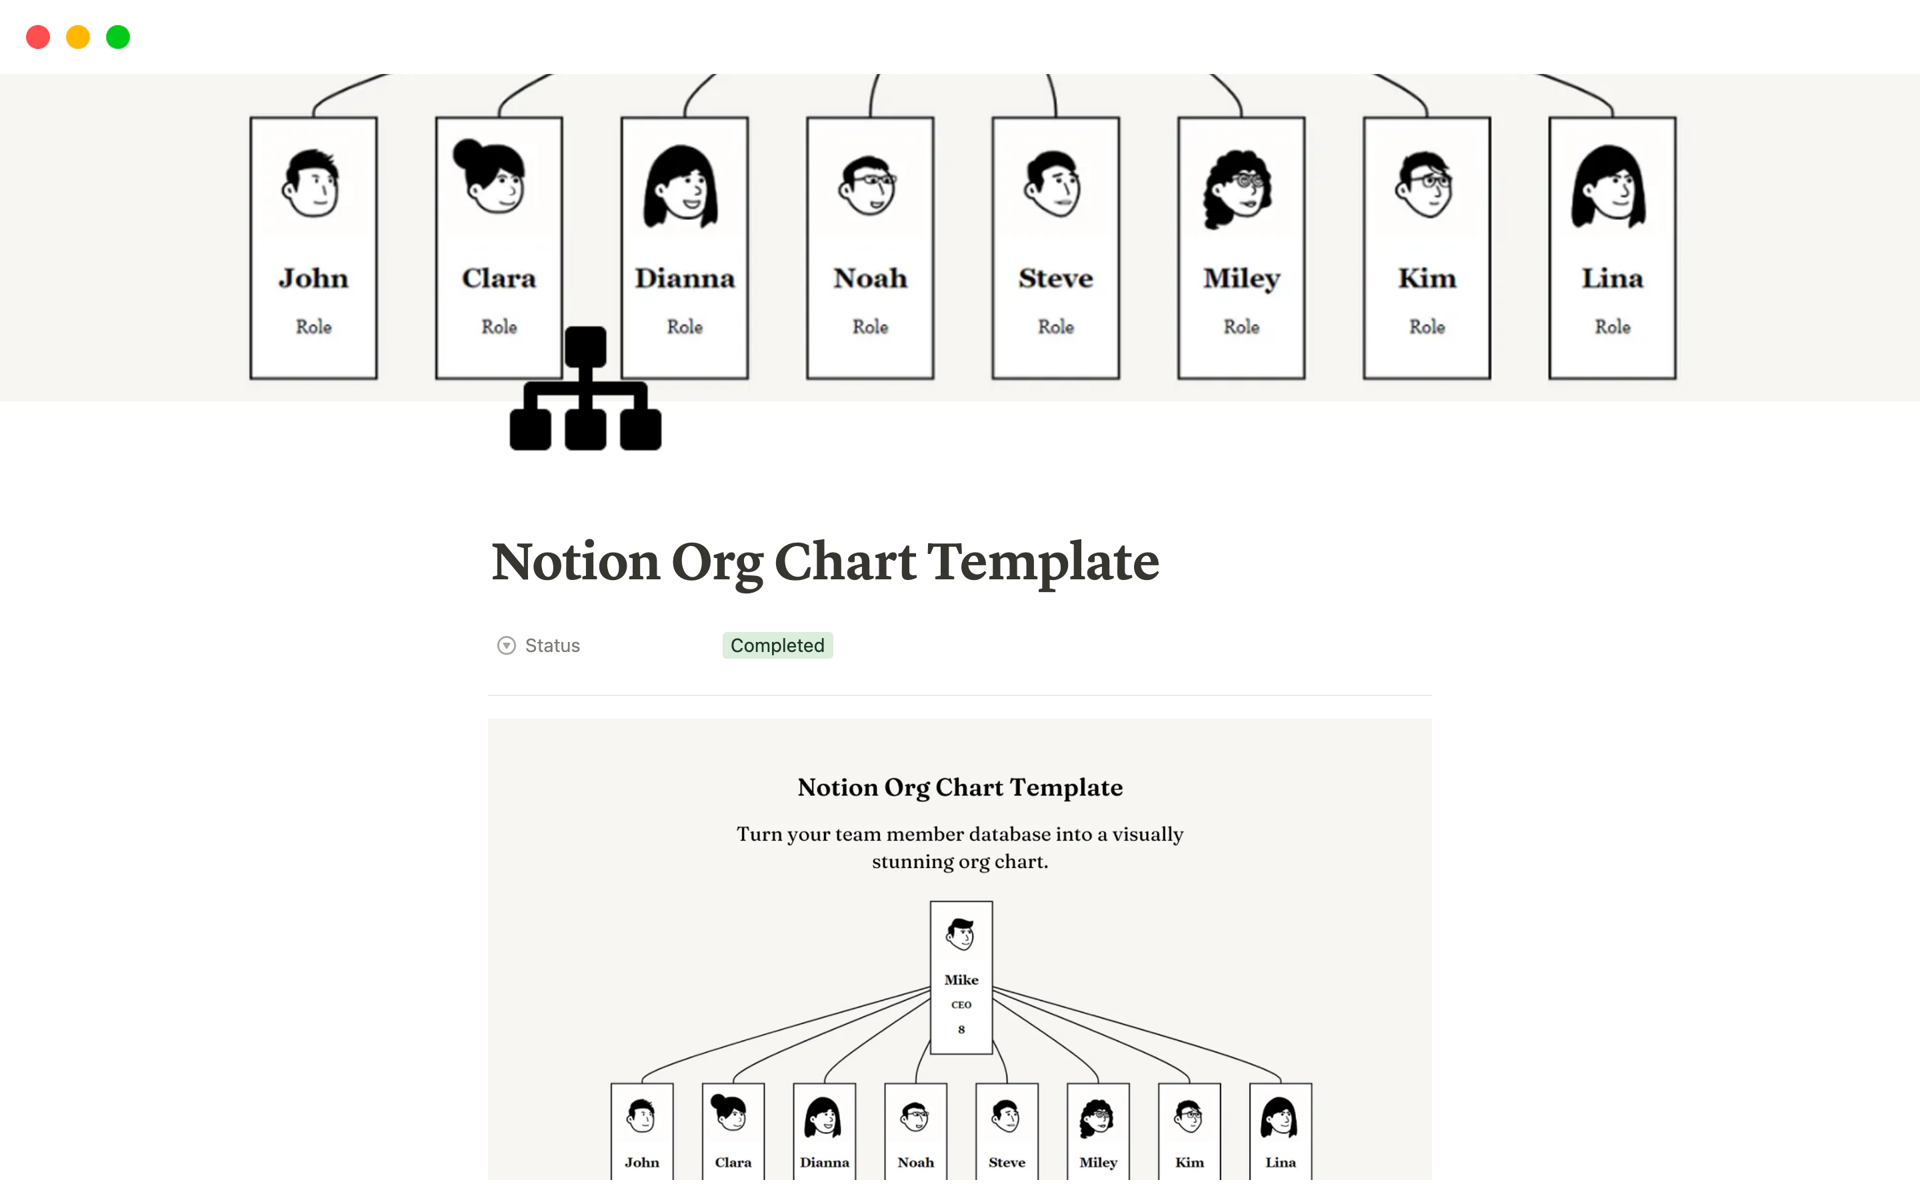 lemtli-notion-site-notion-org-chart-template-c683aed8ebe94068bc6b6d40ee51d251-automated-desktop